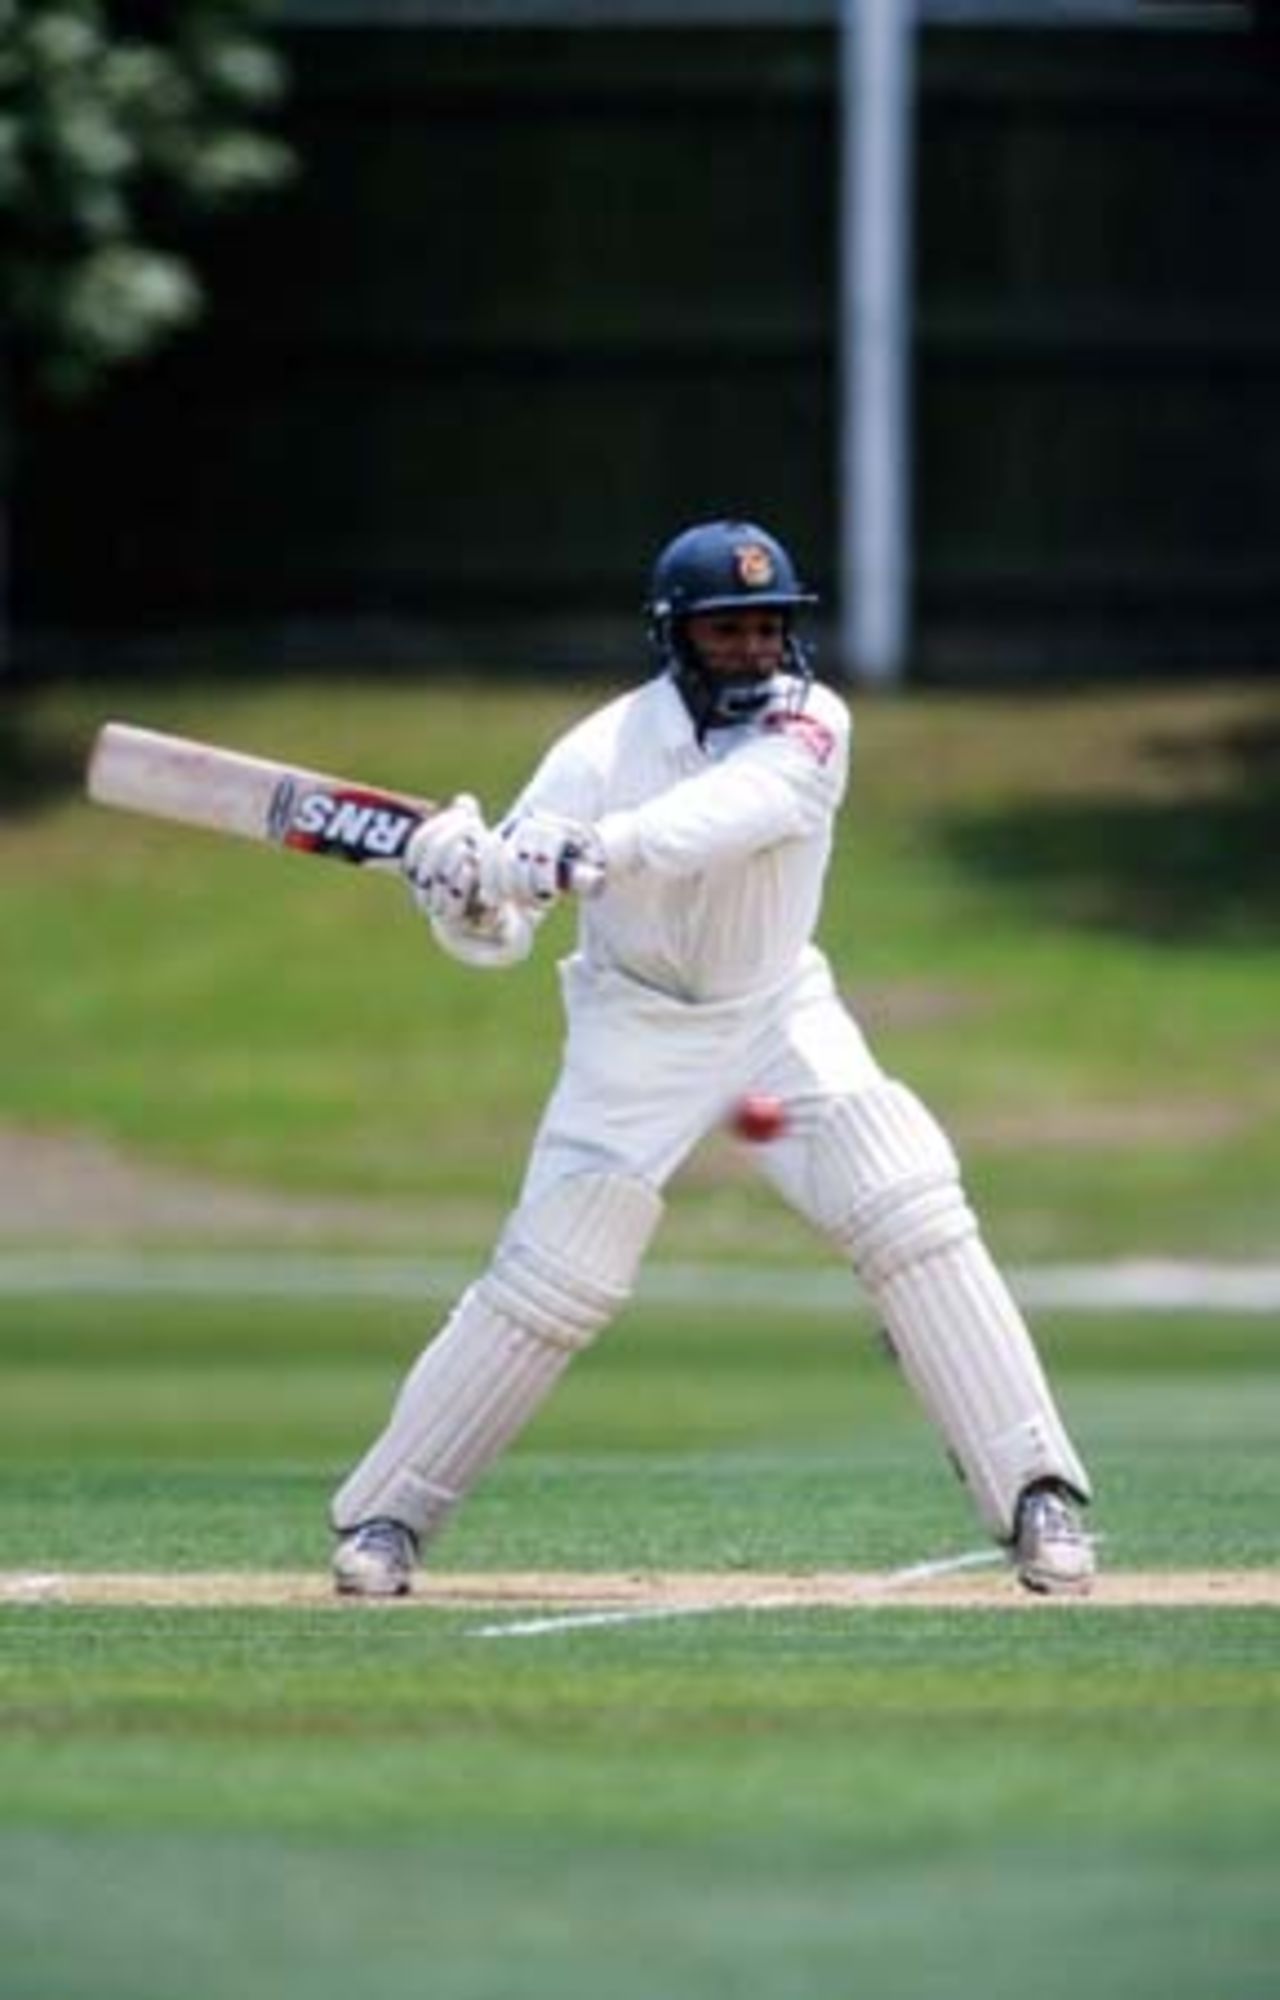 Bangladeshi batsman Javed Omar about to play a delivery during his second innings of four. Tour match: Auckland v Bangladeshis at Eden Park Outer Oval, Auckland, 12-15 Dec 2001 (14 December 2001).